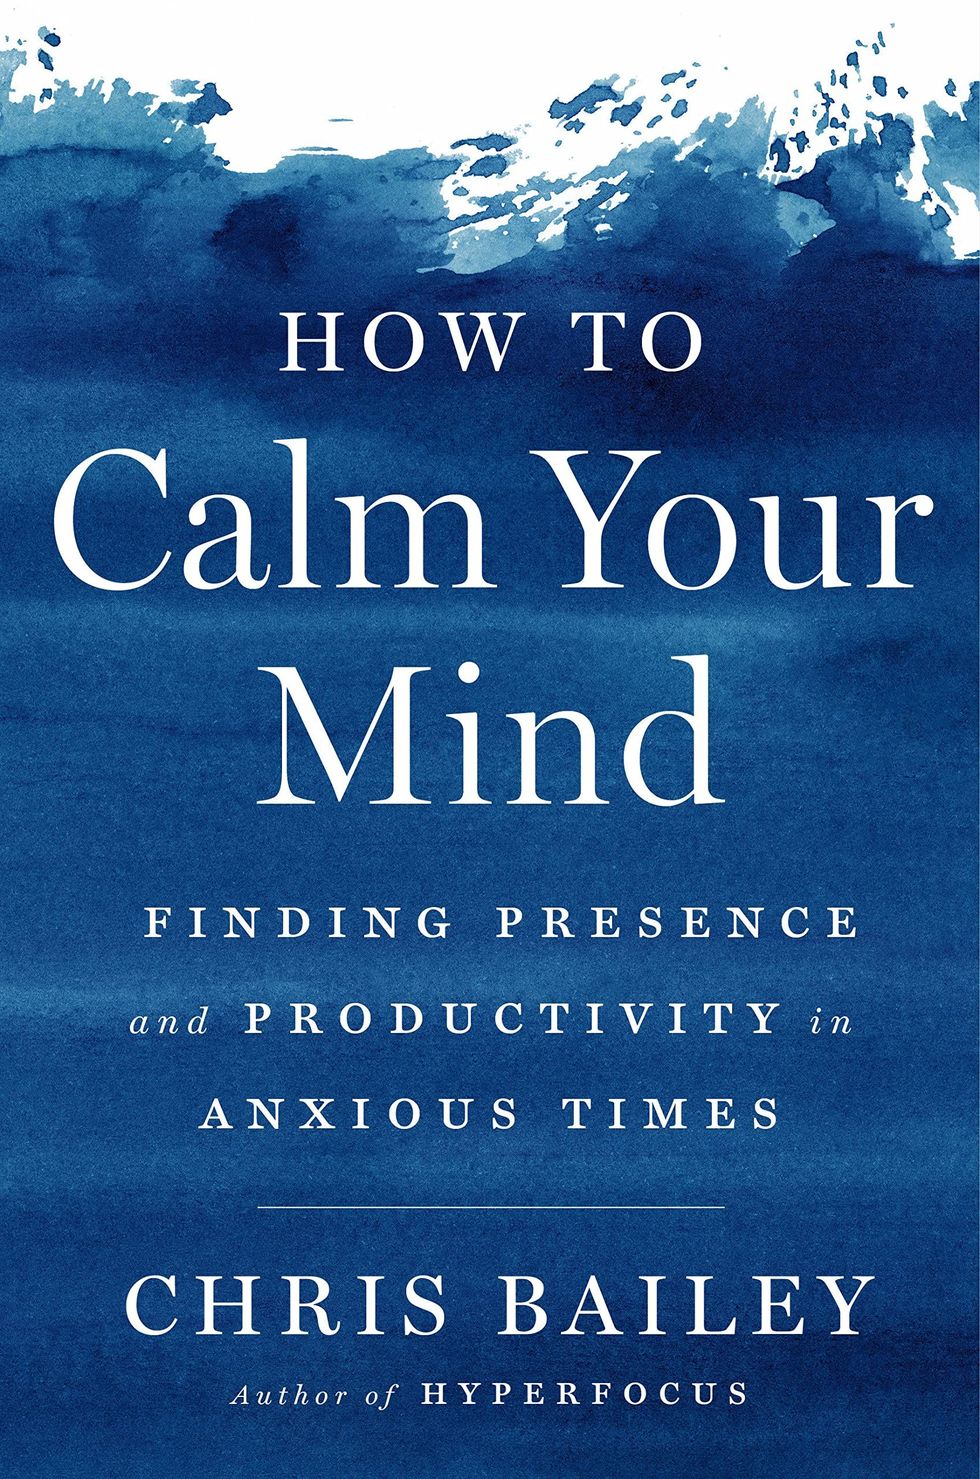 <i>How to Calm Your Mind</i>, by Chris Bailey